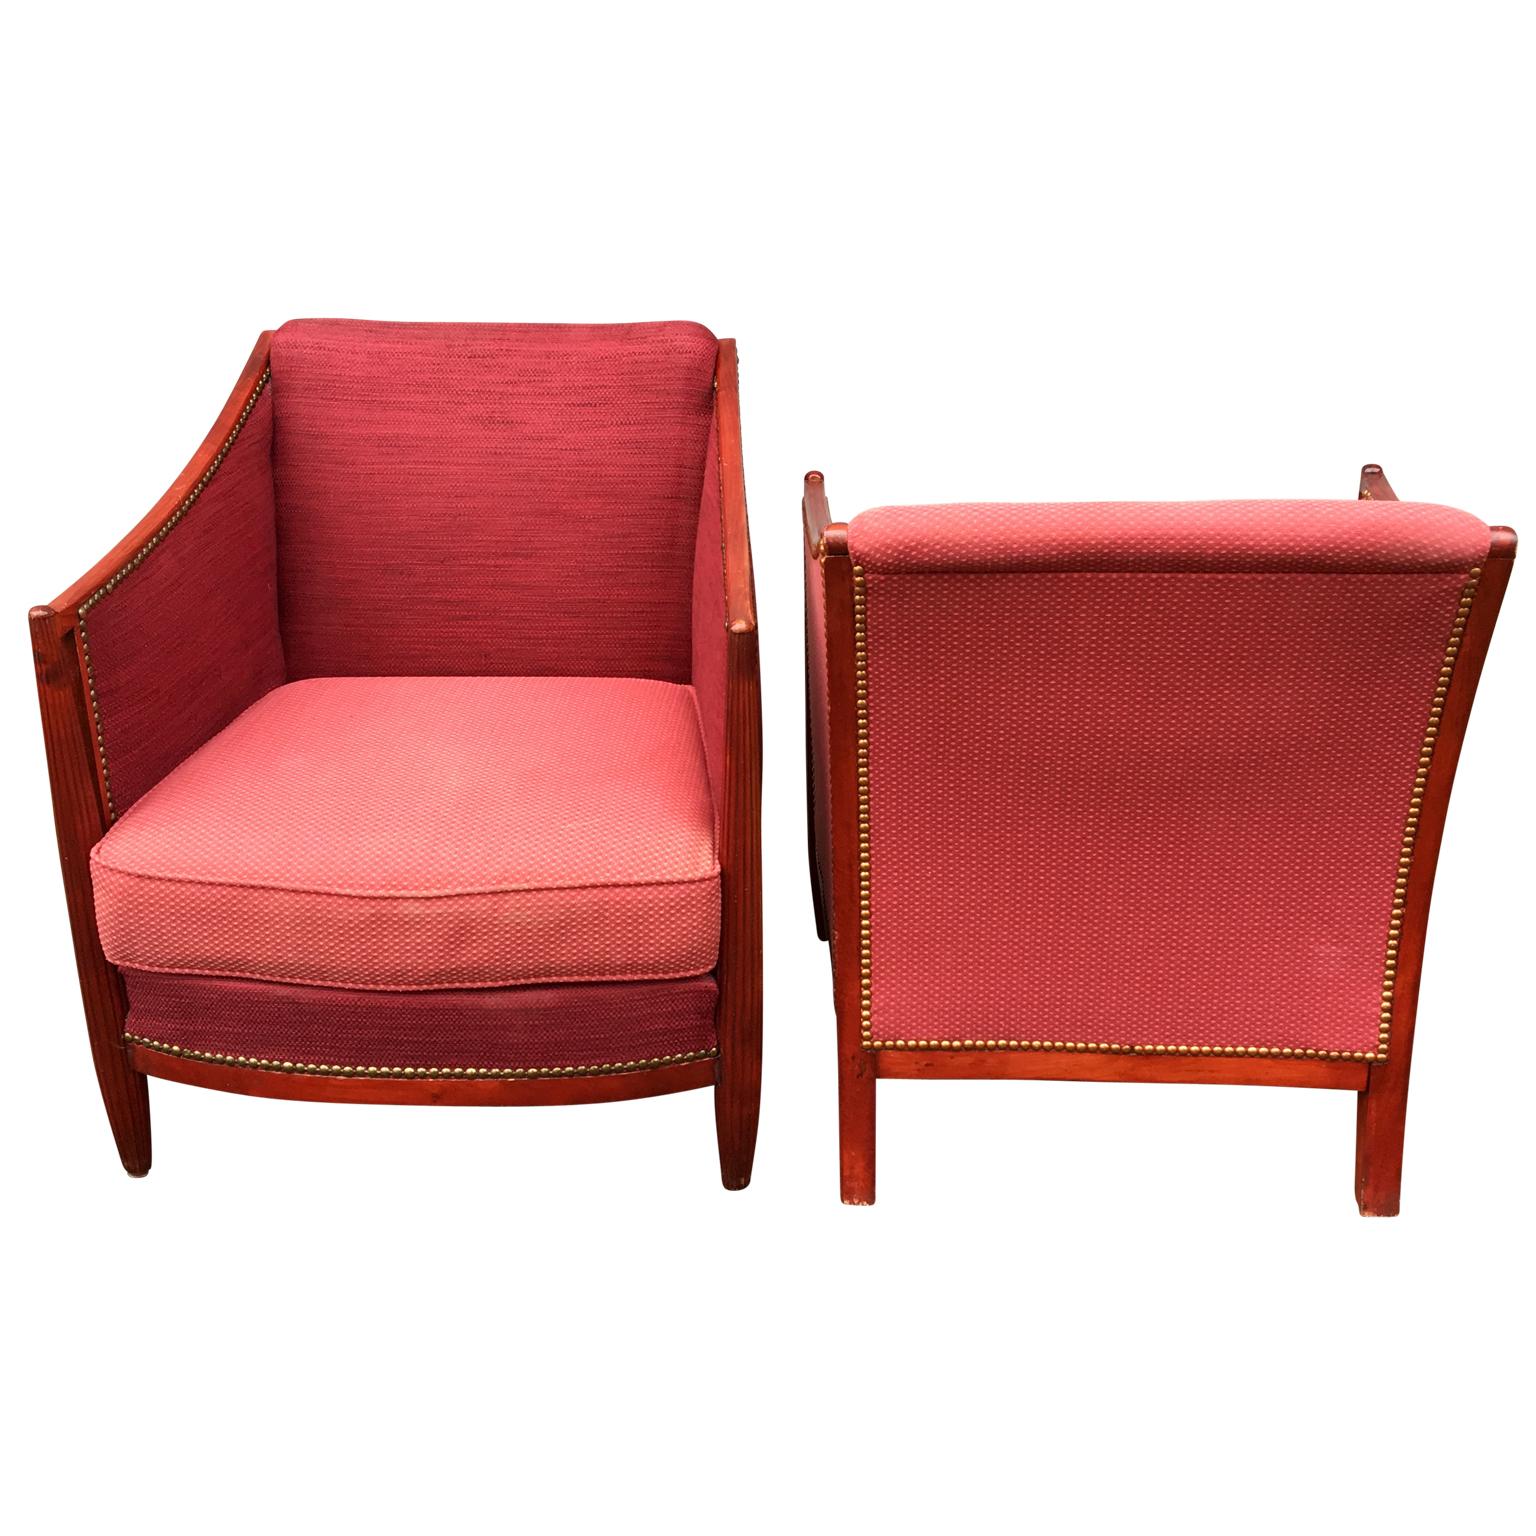 A pair of French Art Deco lounge chairs in mahogany wood, from a hotel in Strassbourg France.